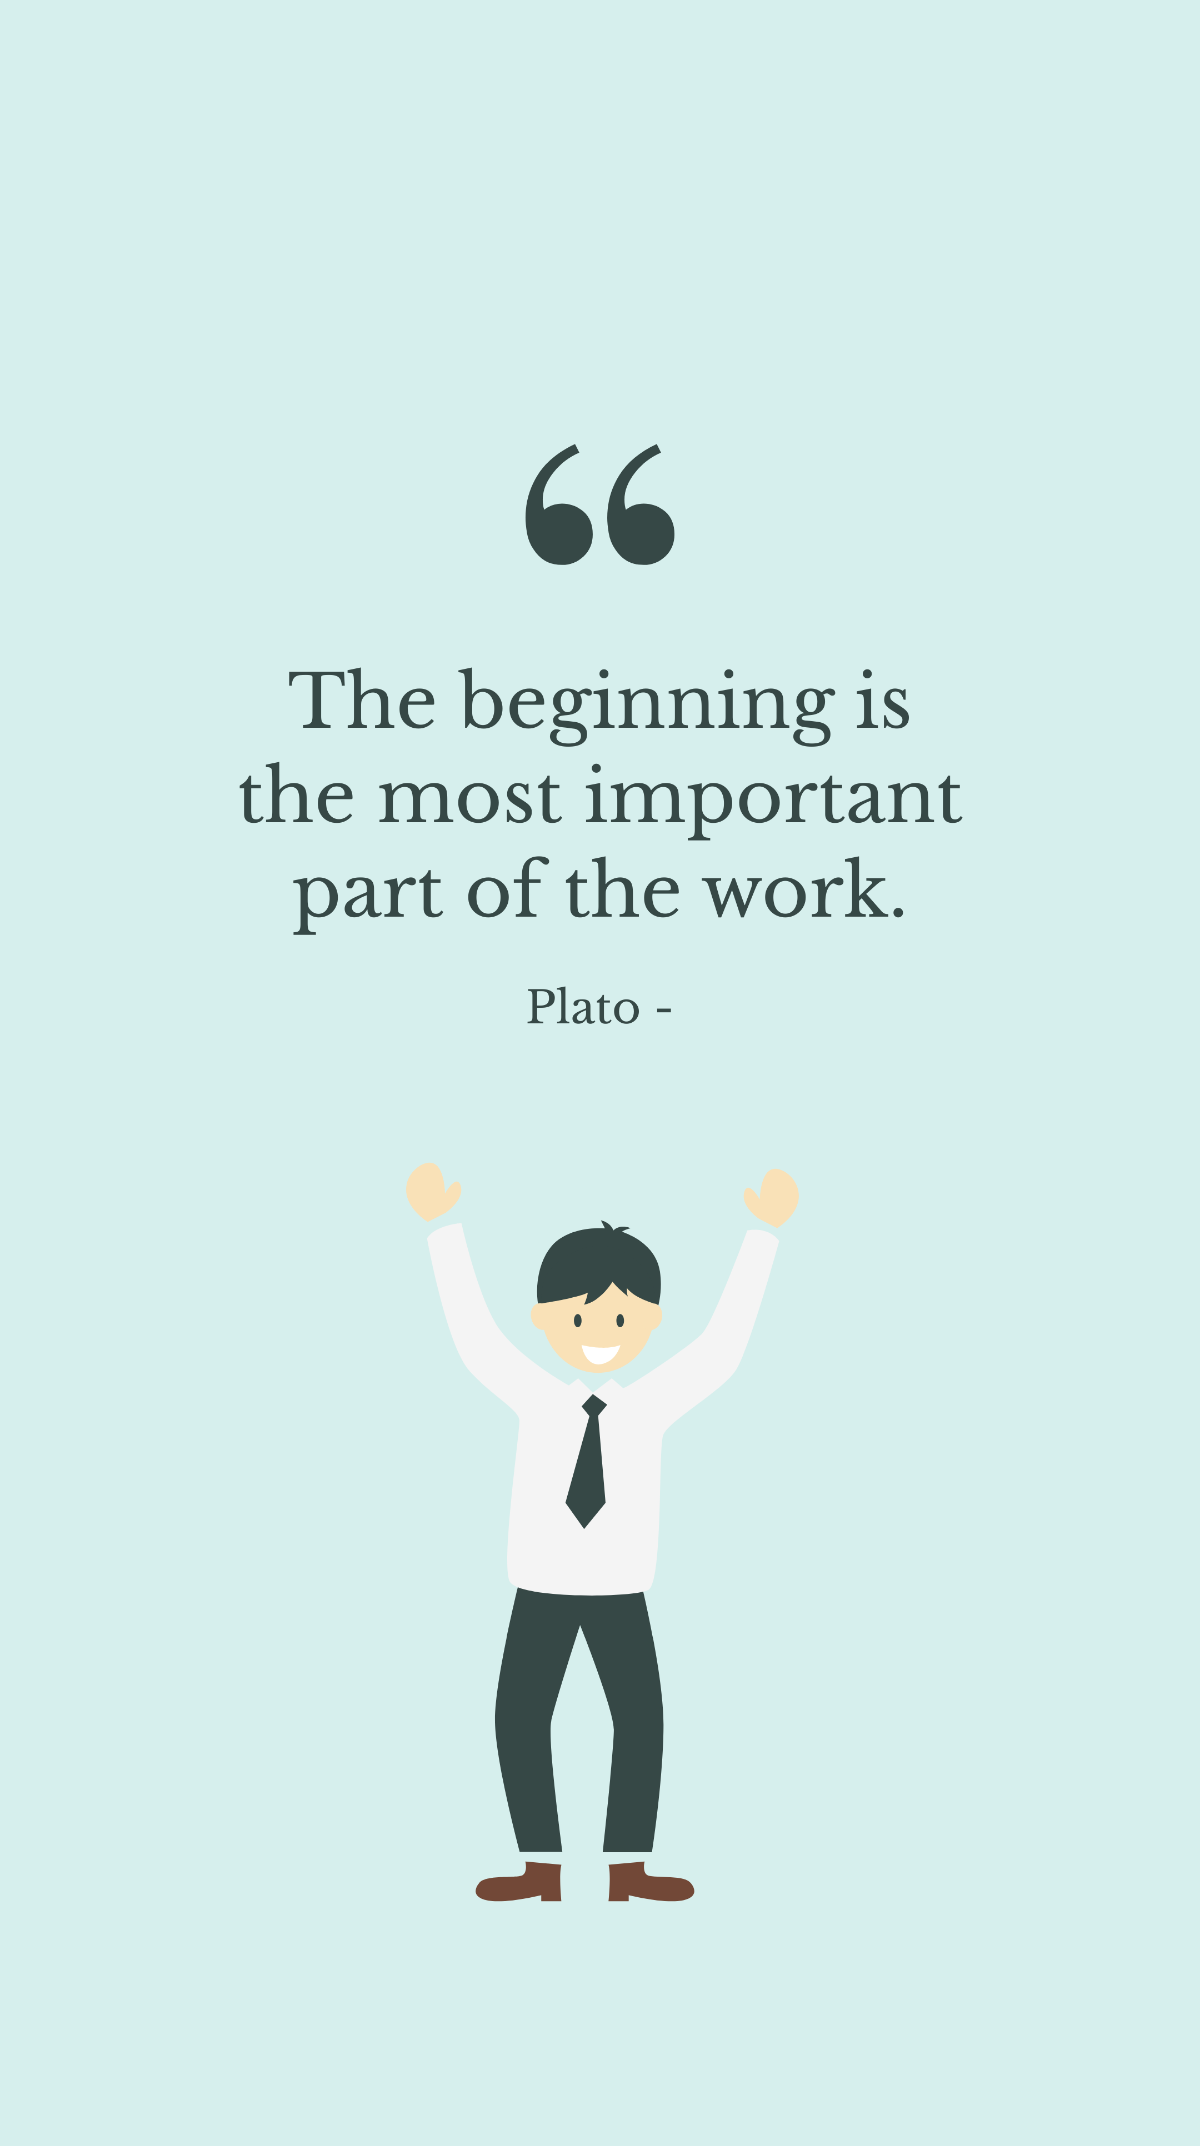 Free Plato - The beginning is the most important part of the work. Template